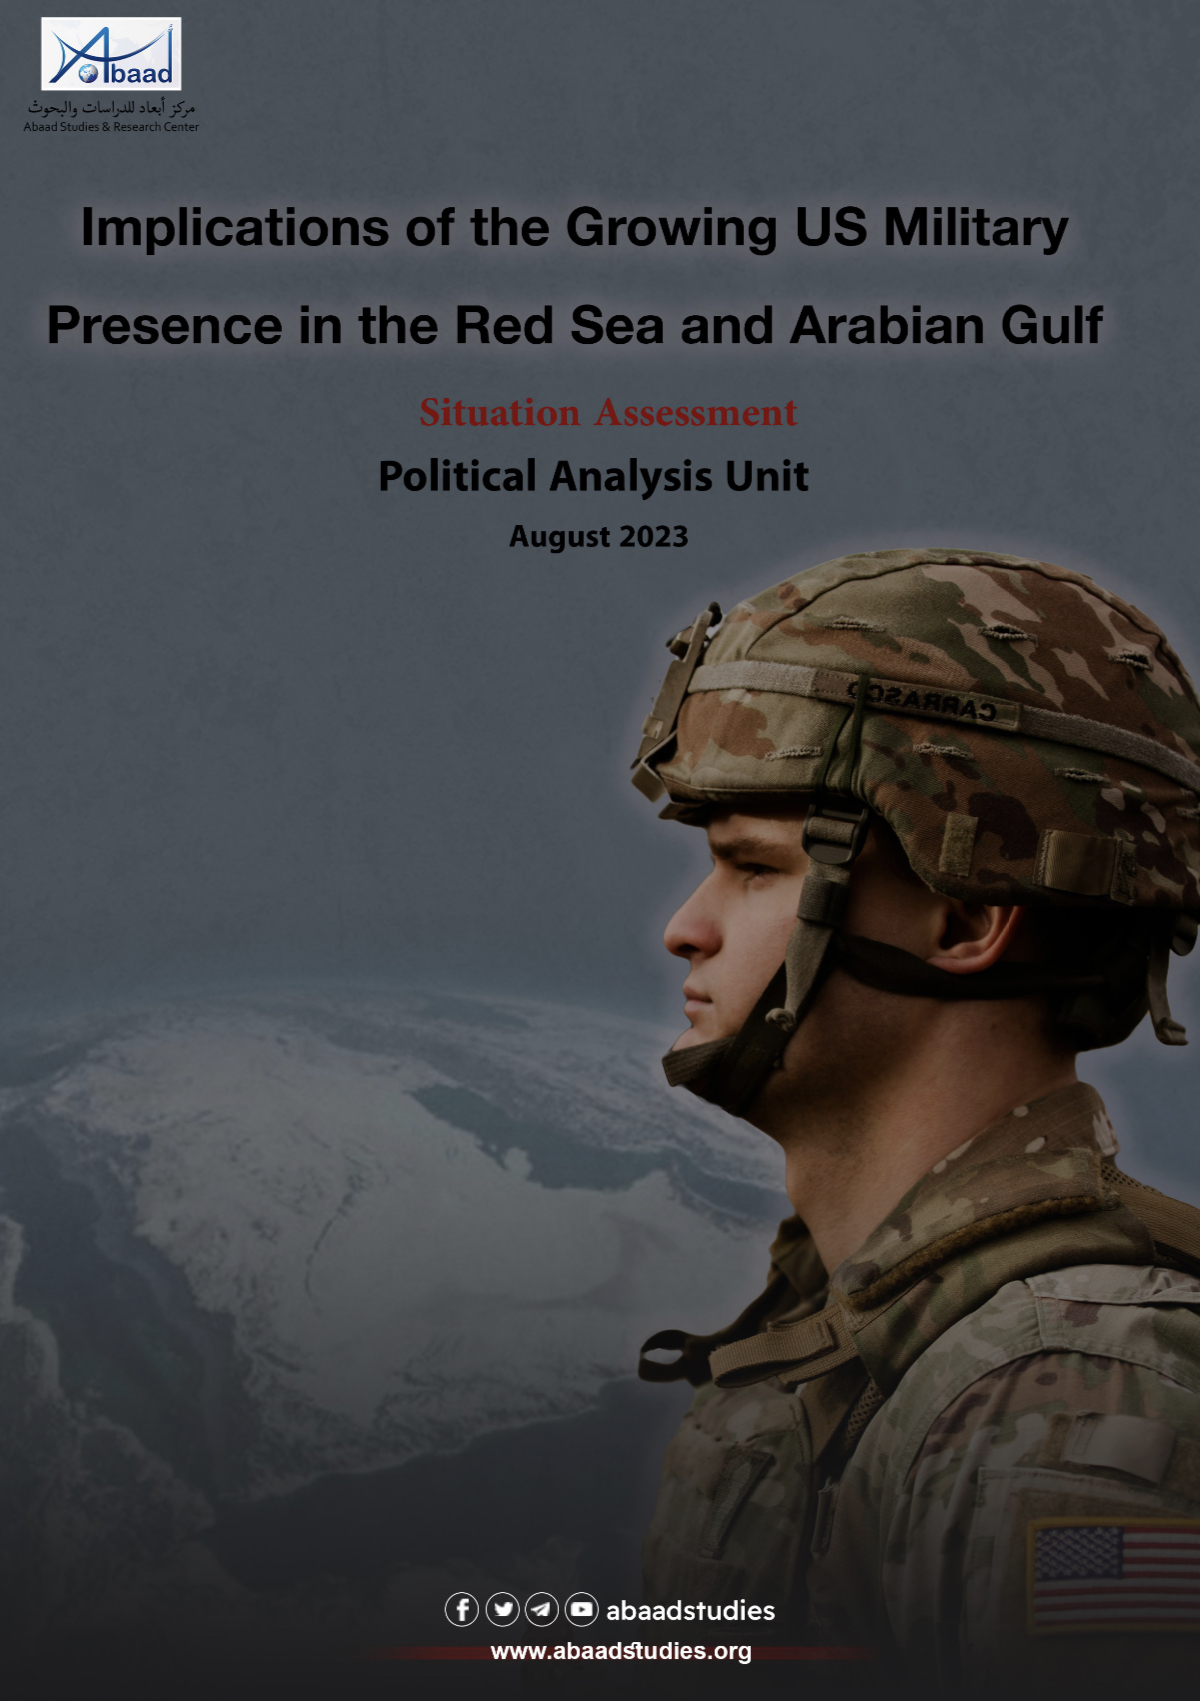  Implications of the Growing US Military Presence in the Red Sea and Arabian Gulf